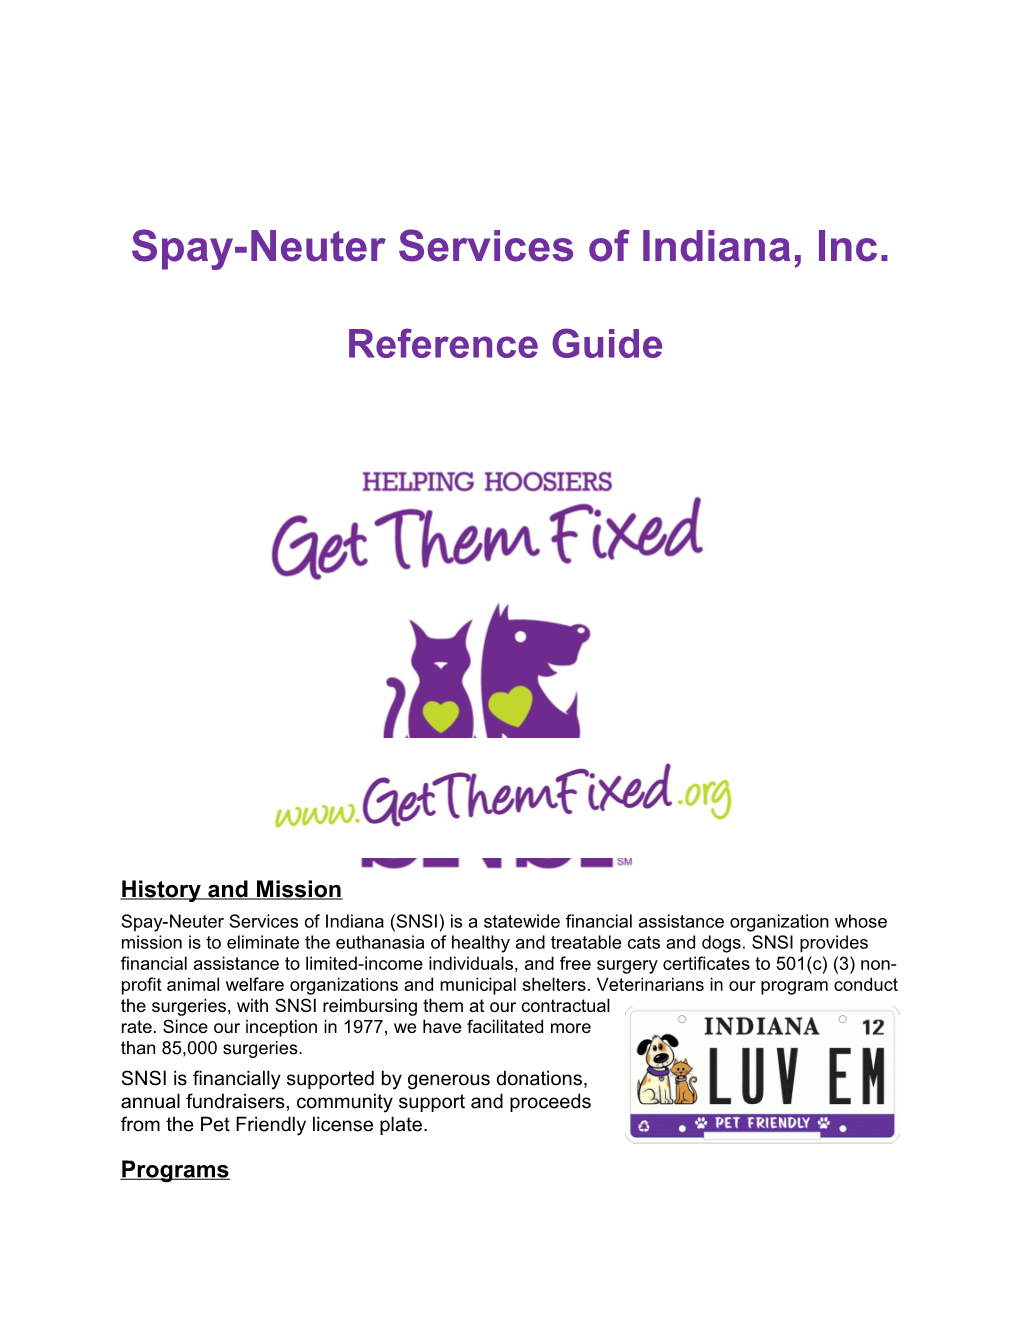 Spay-Neuter Services of Indiana, Inc